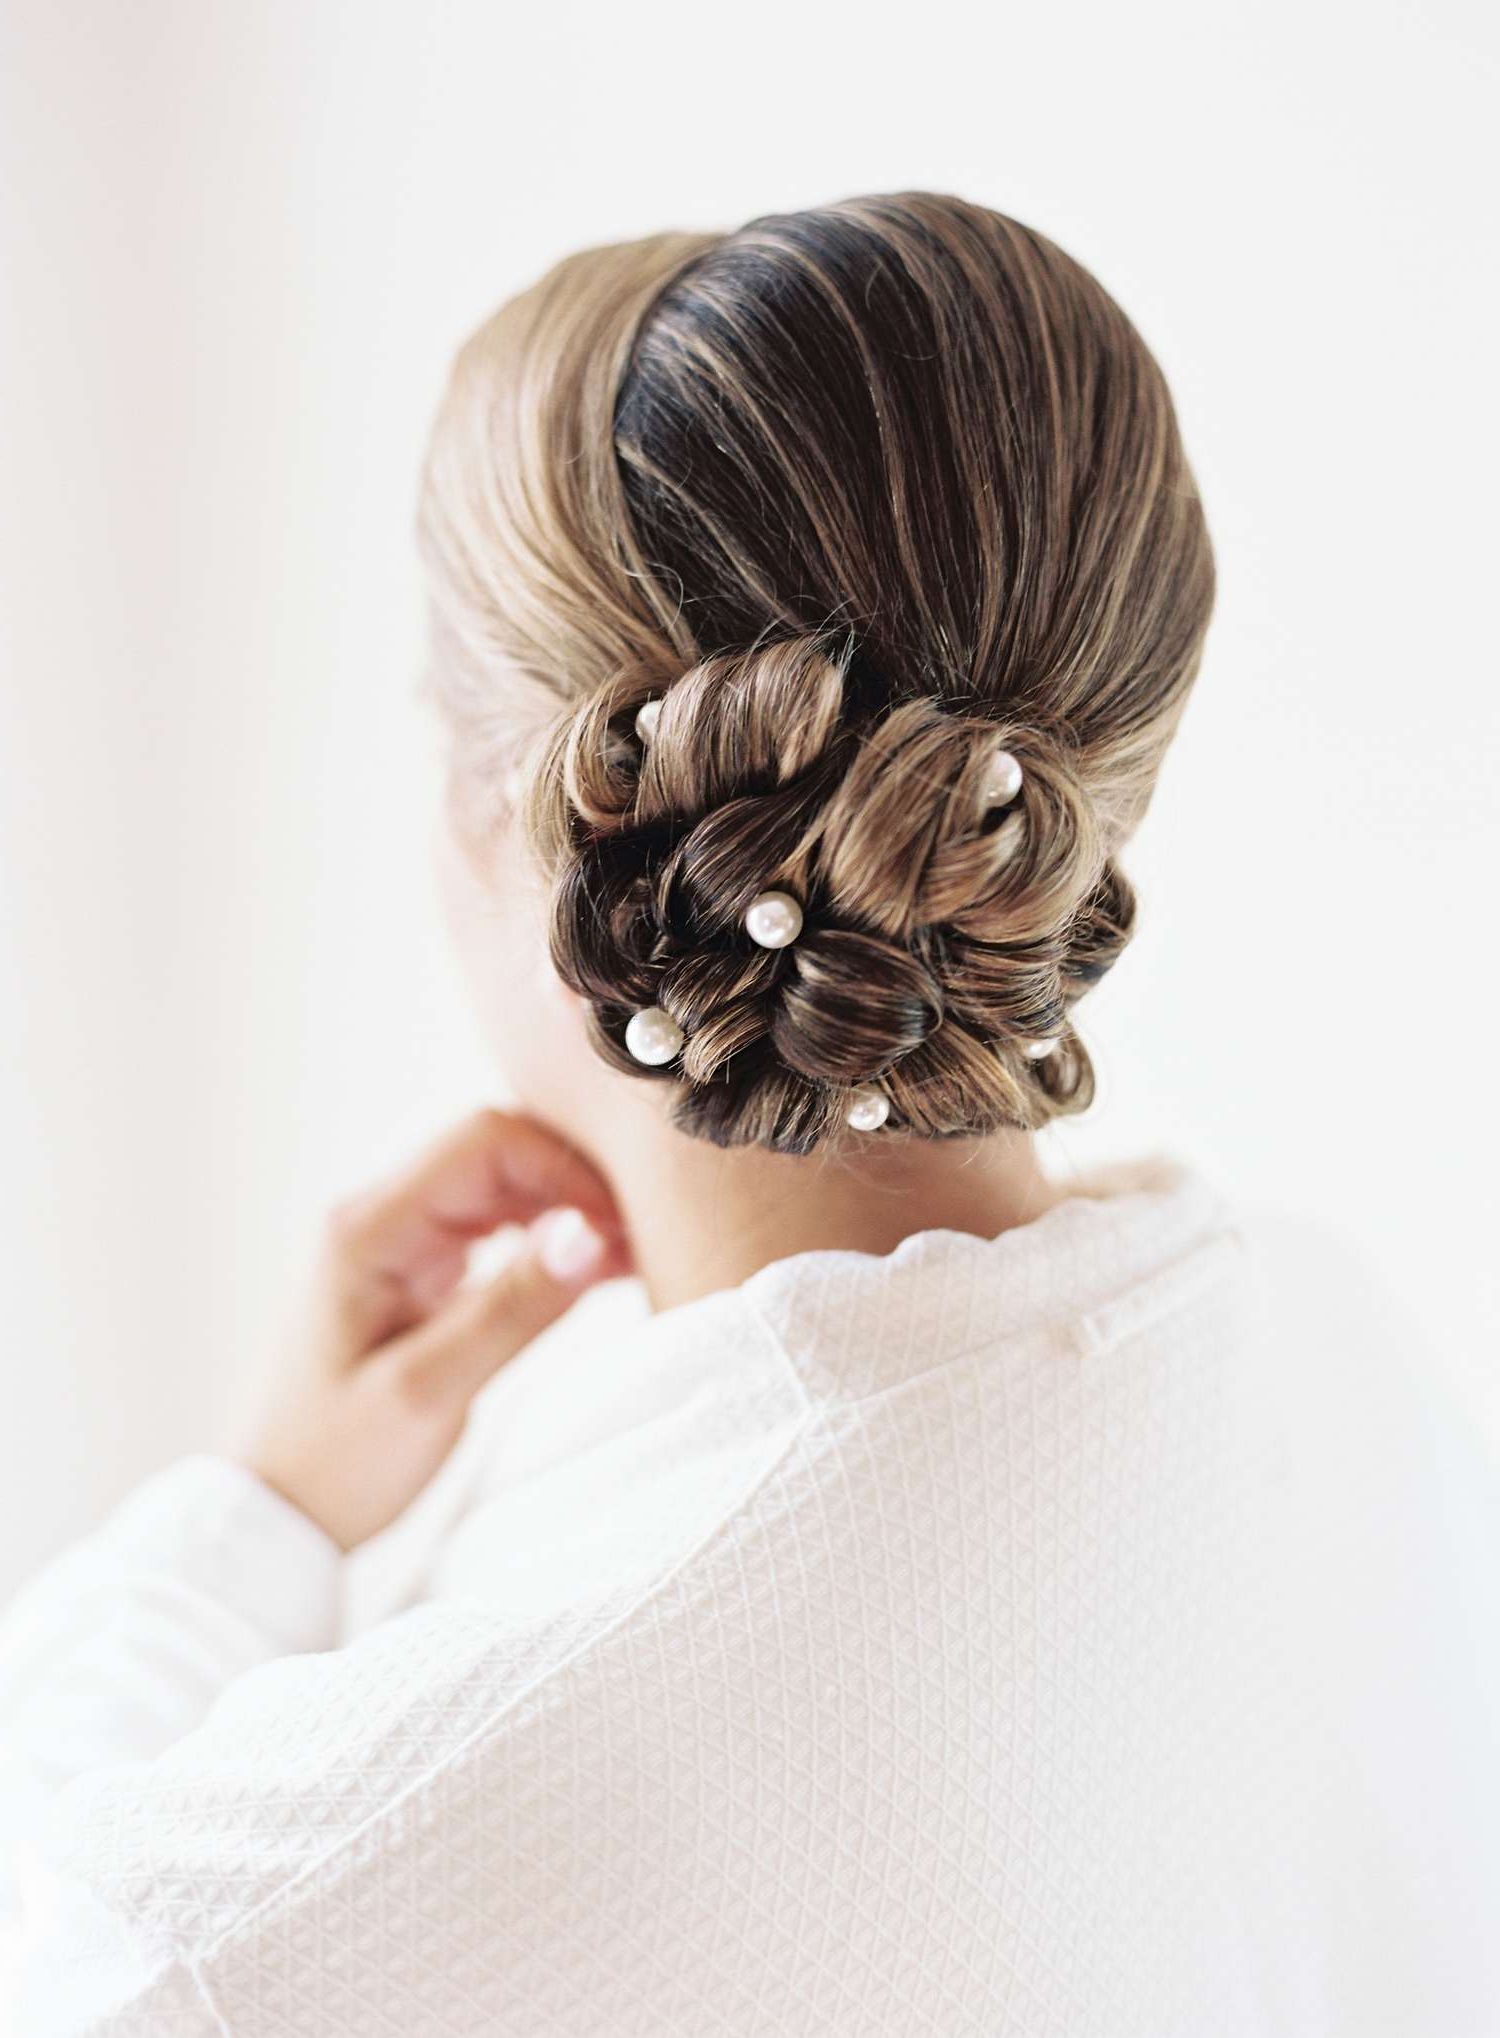 10 Low Bun Wedding Hairstyles For Every Type Of Bride With Regard To Low Formal Bun Updo (View 24 of 25)